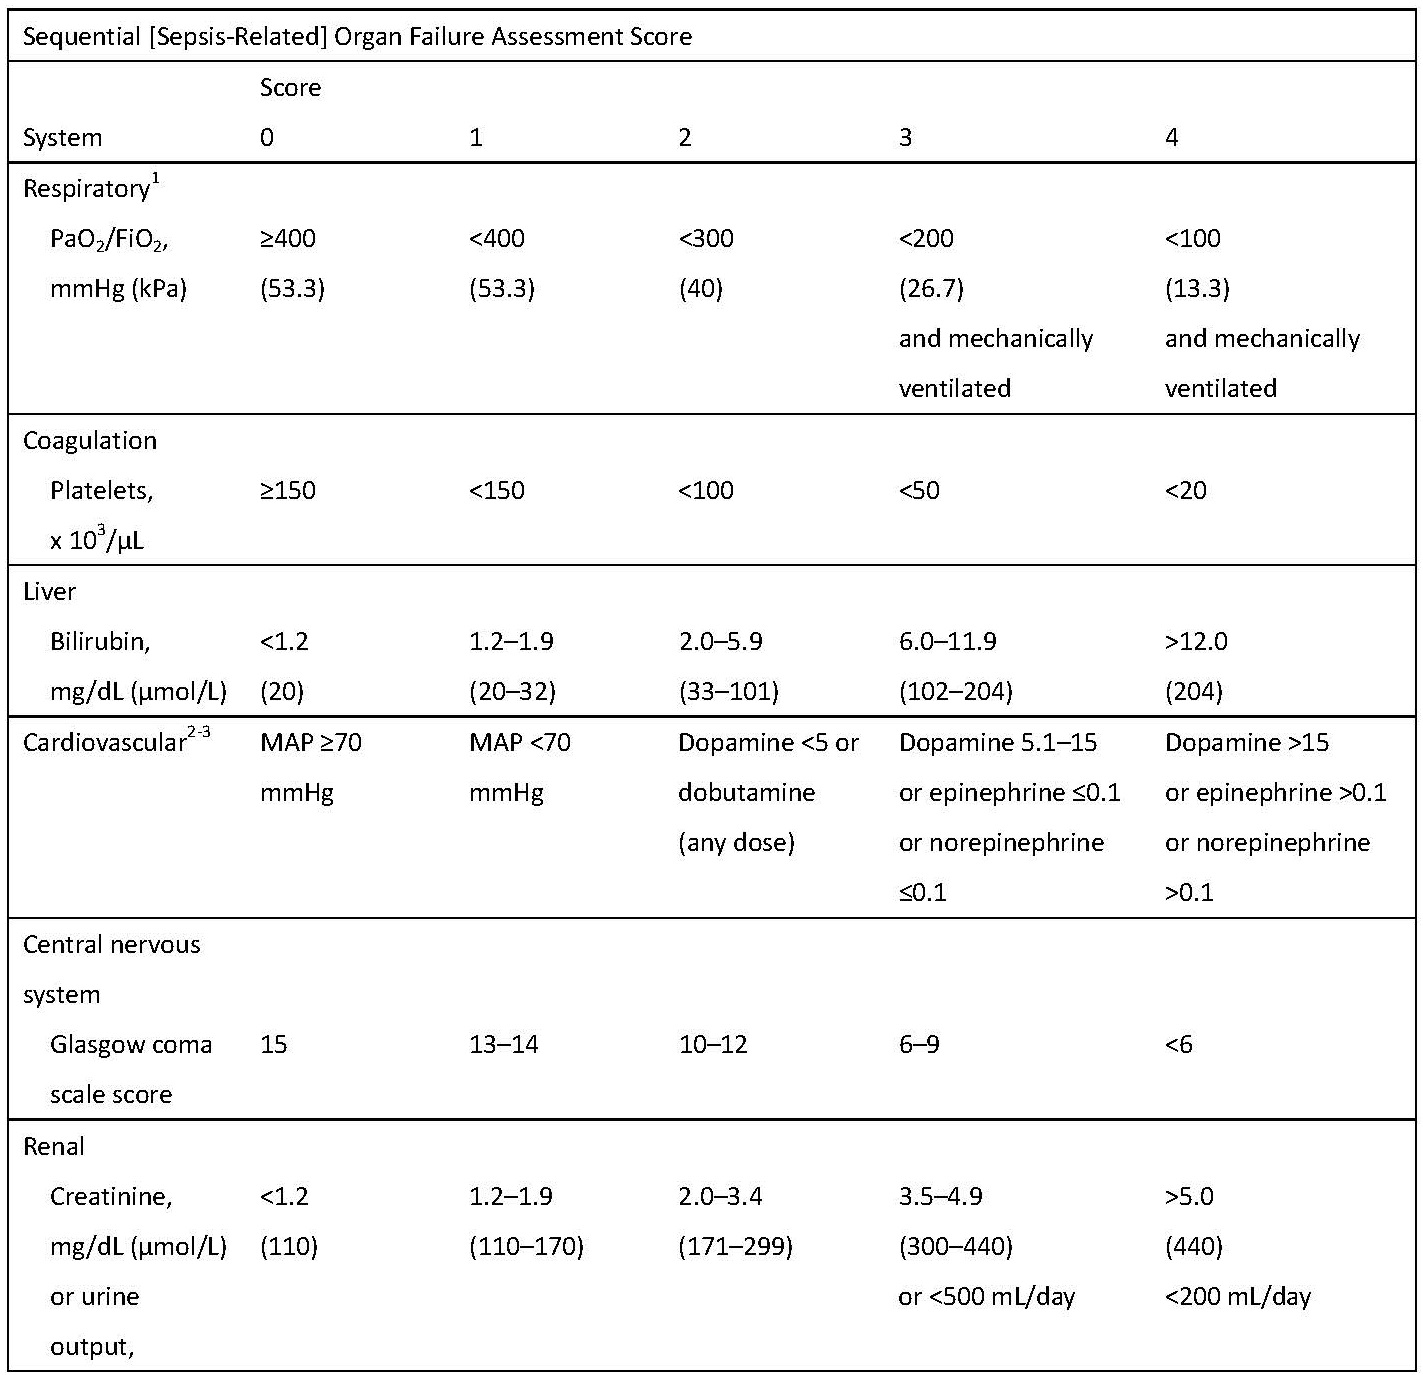 Sequential [Sepsis-Related] Organ Failure Assessment Score Table